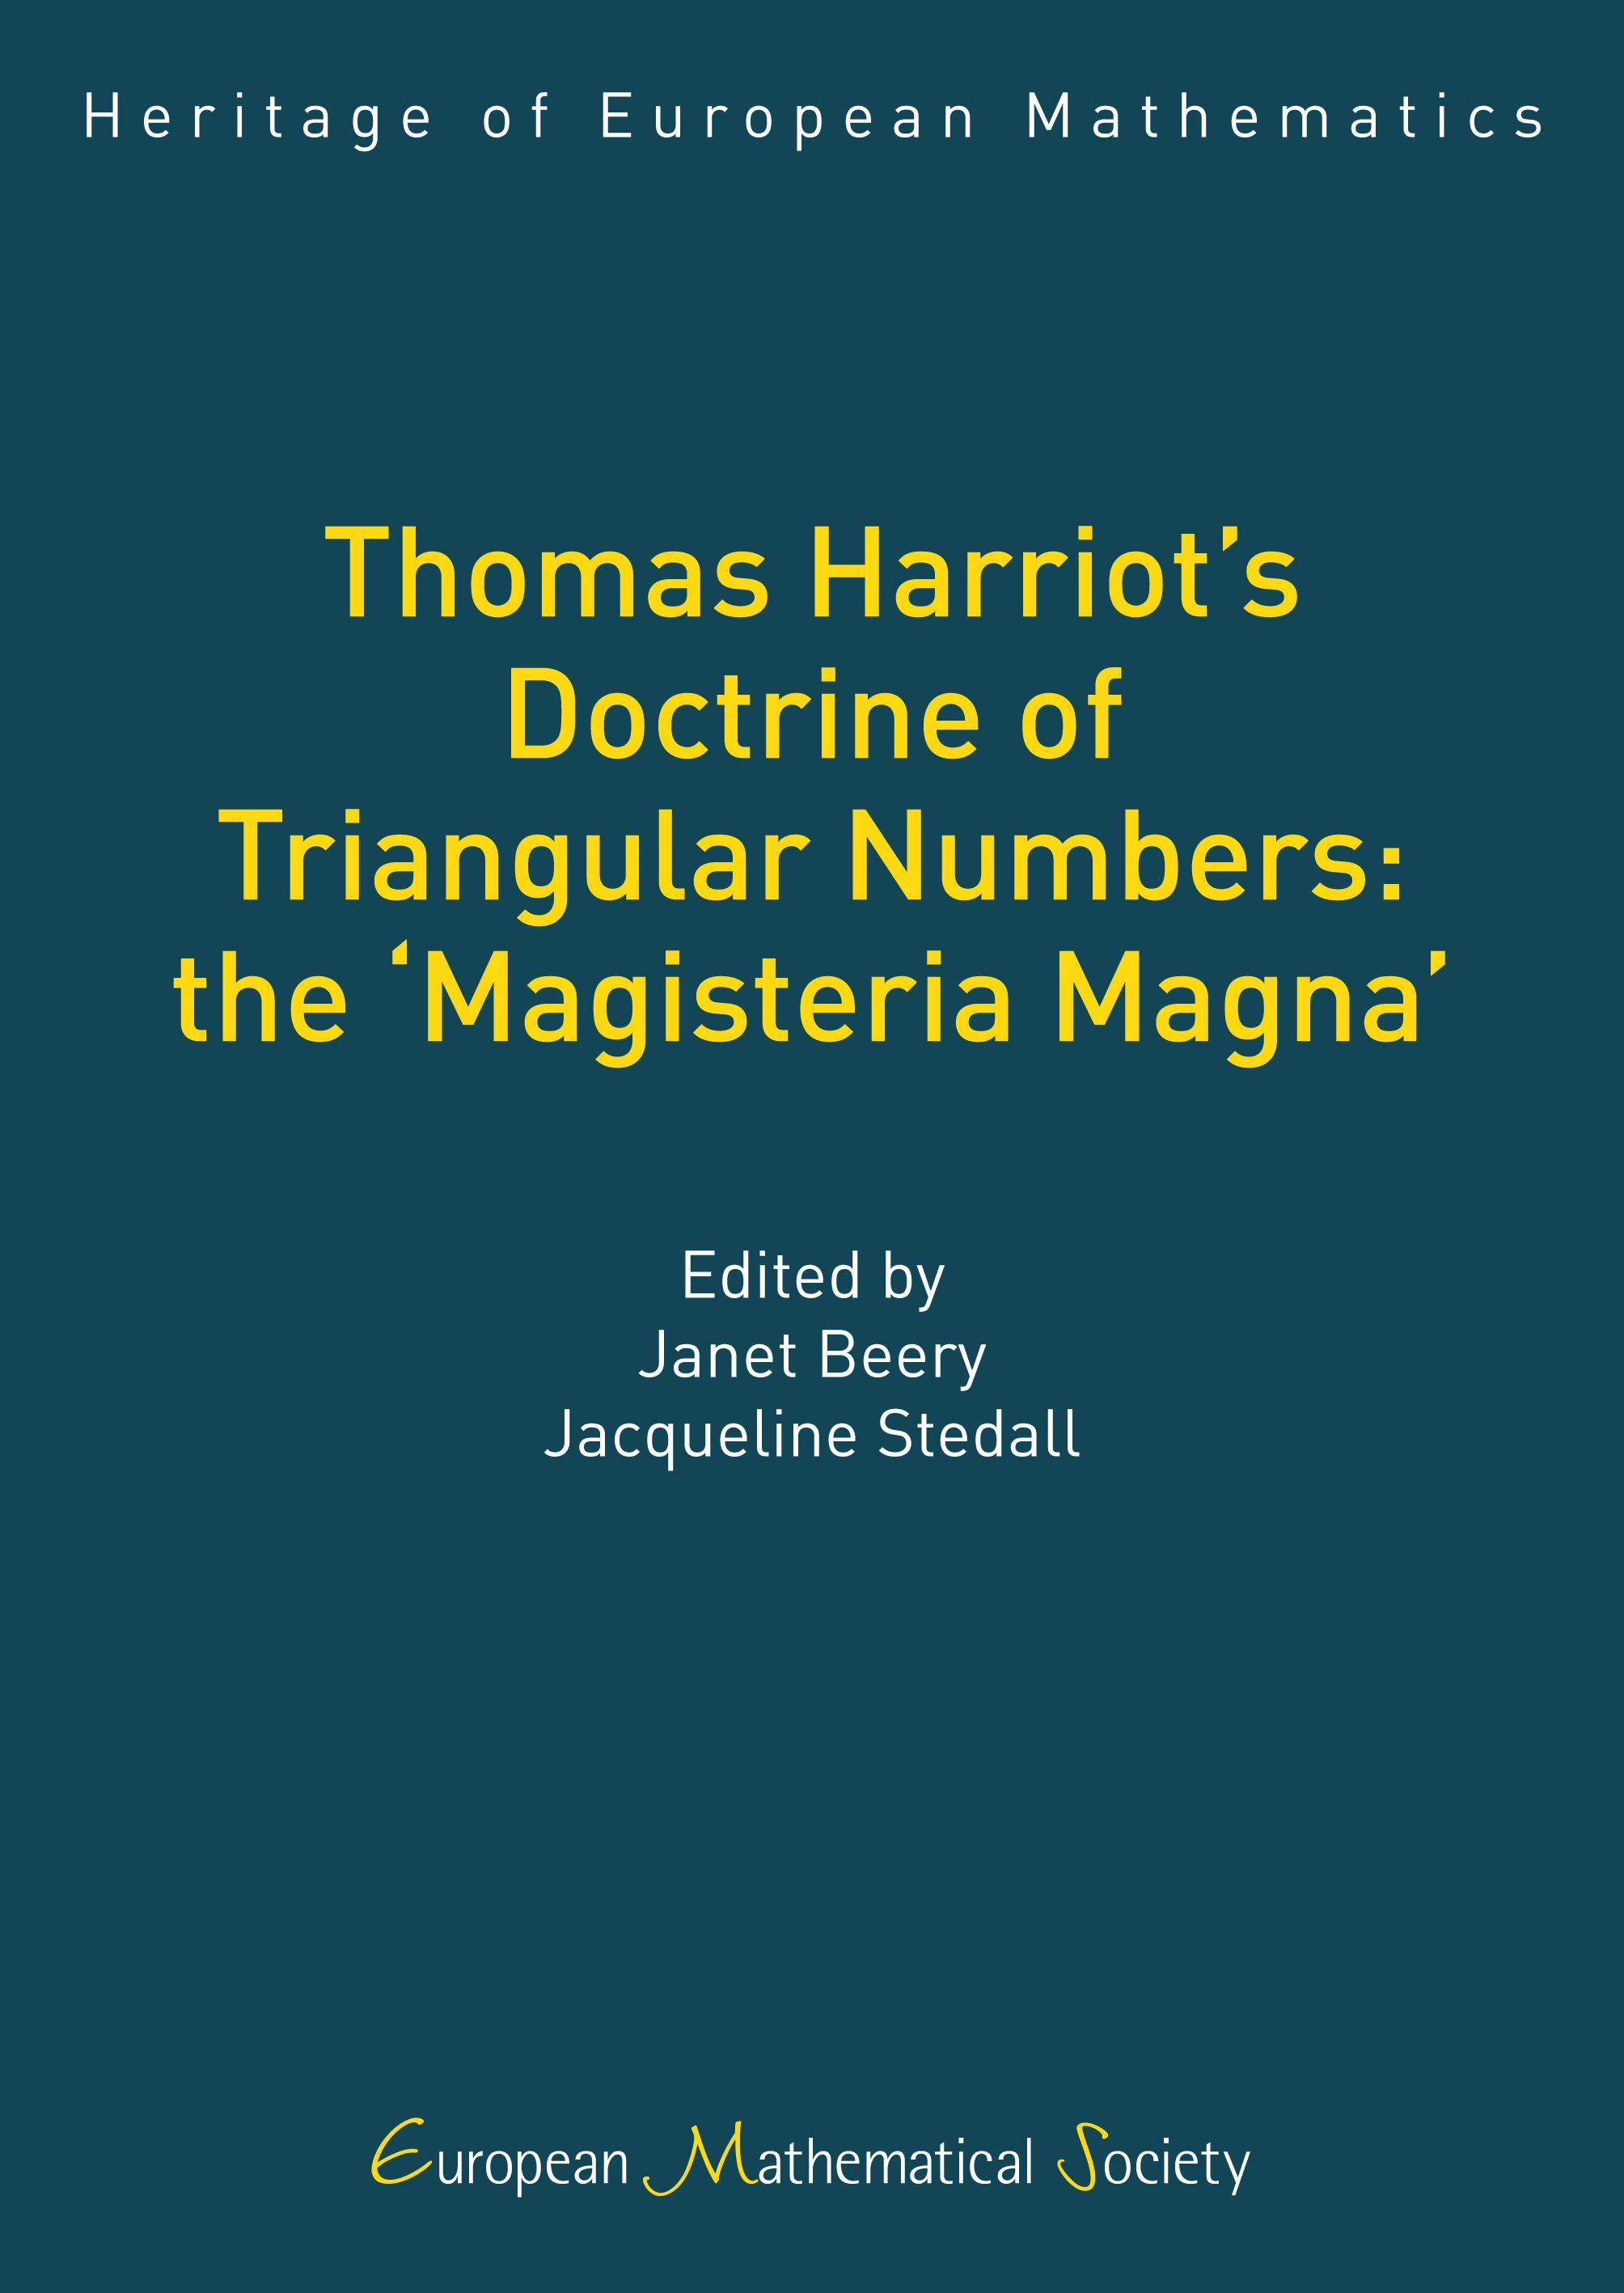 Thomas Harriot’s Doctrine of Triangular Numbers: the ‘Magisteria Magna’ cover